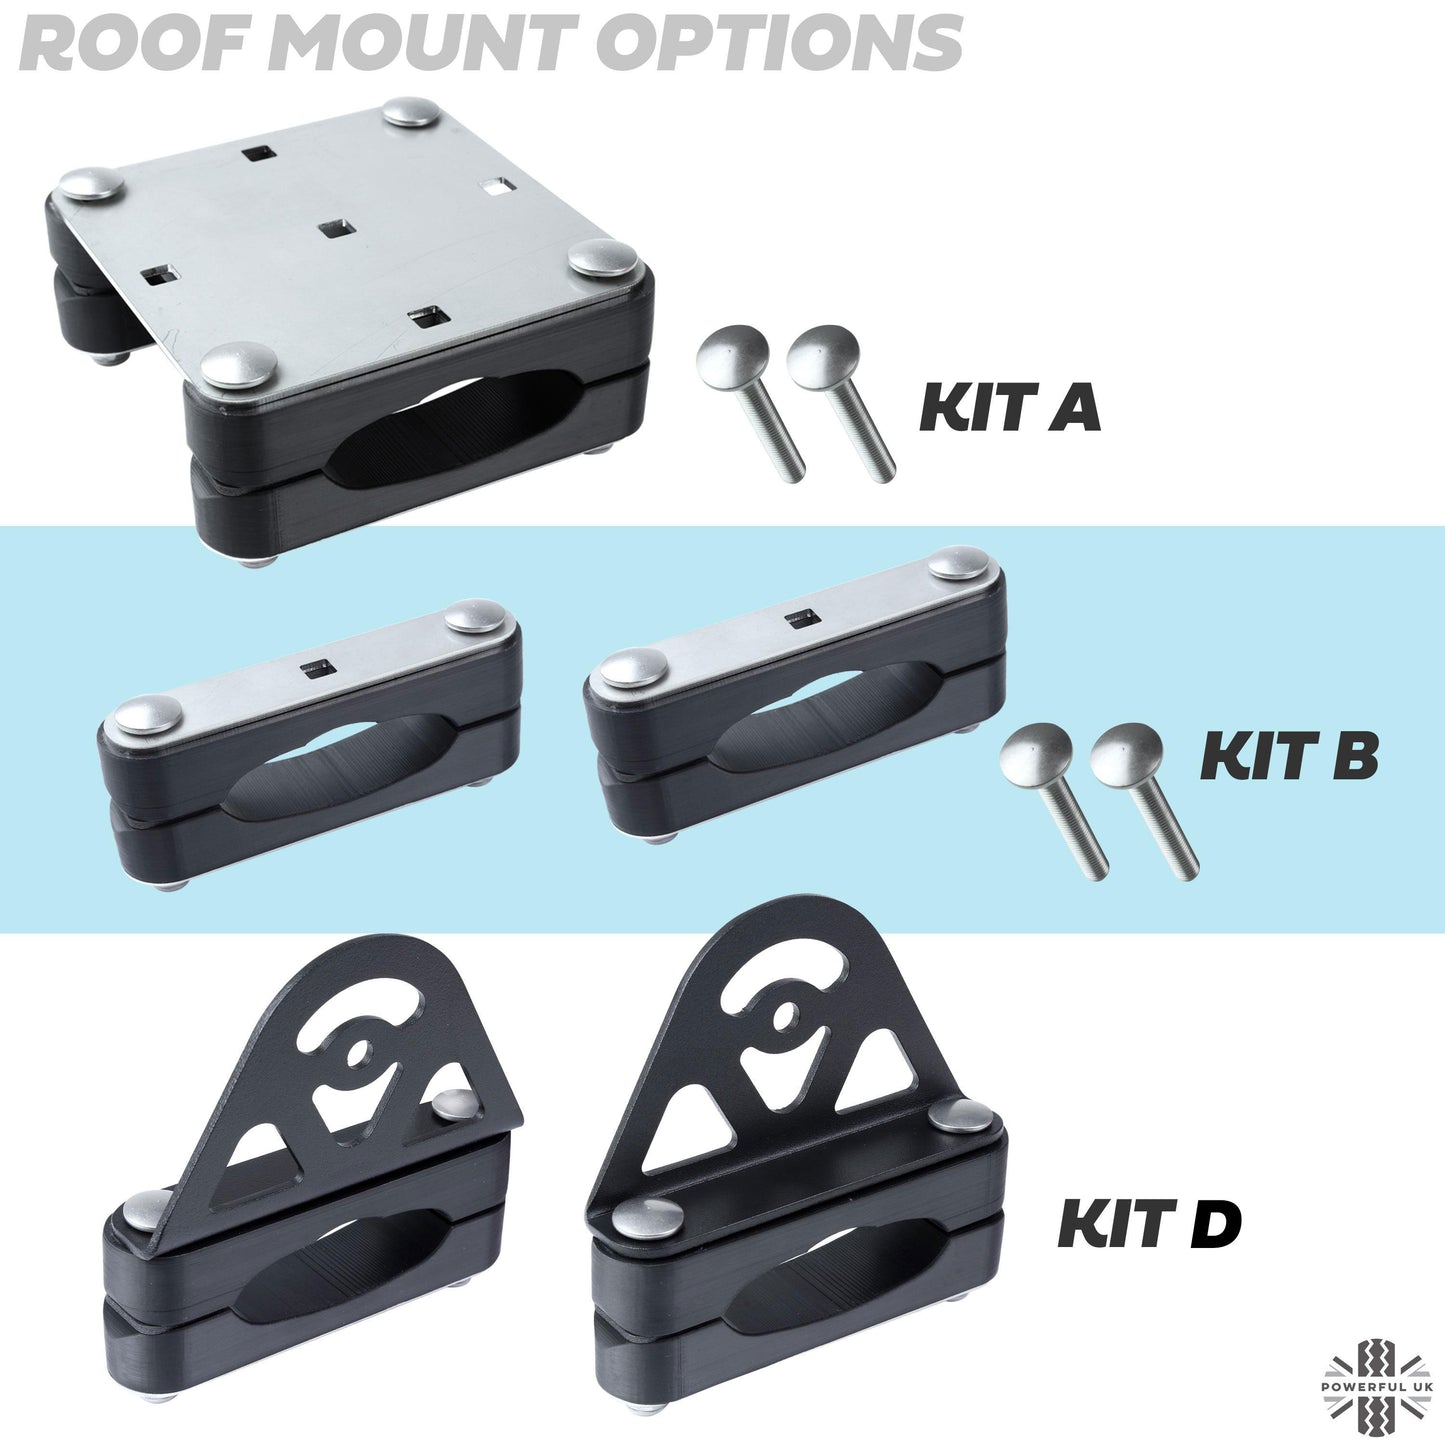 Roof Cross Bar Antenna Mount Kit for the Land Rover Discovery 5 - Kit A - Zinc Plated Top